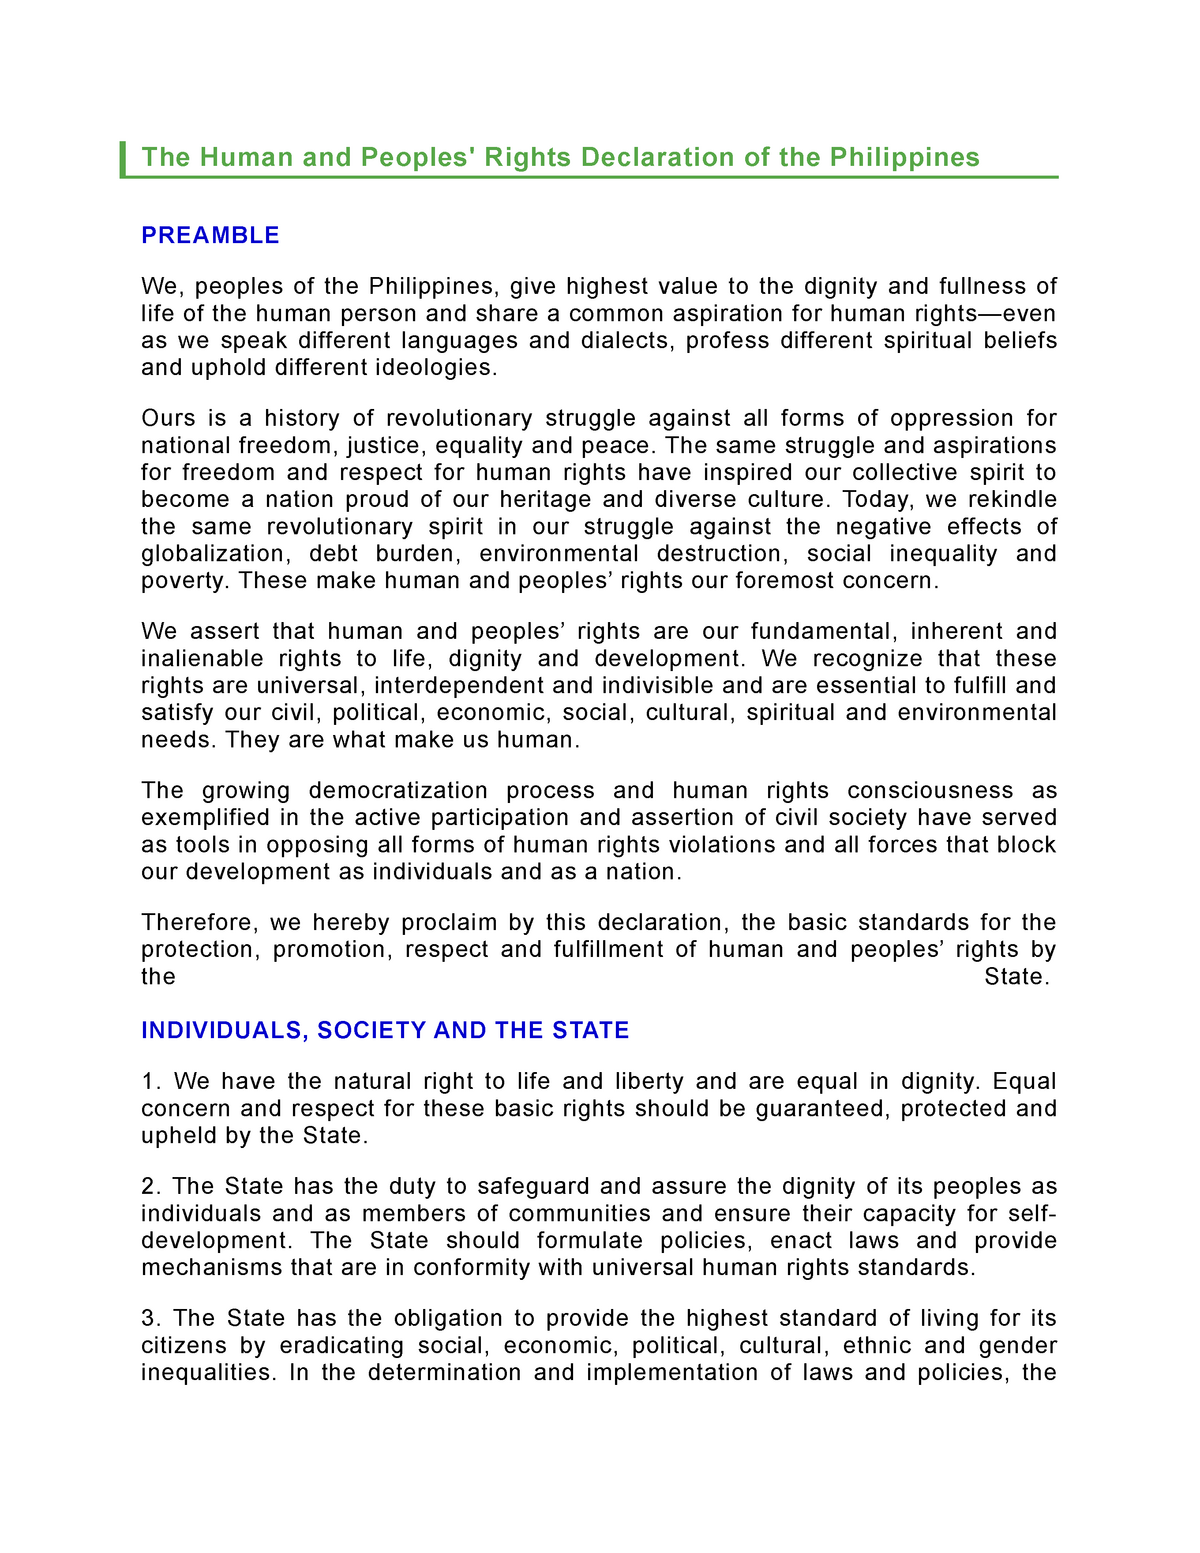 argumentative essay about human rights in the philippines brainly